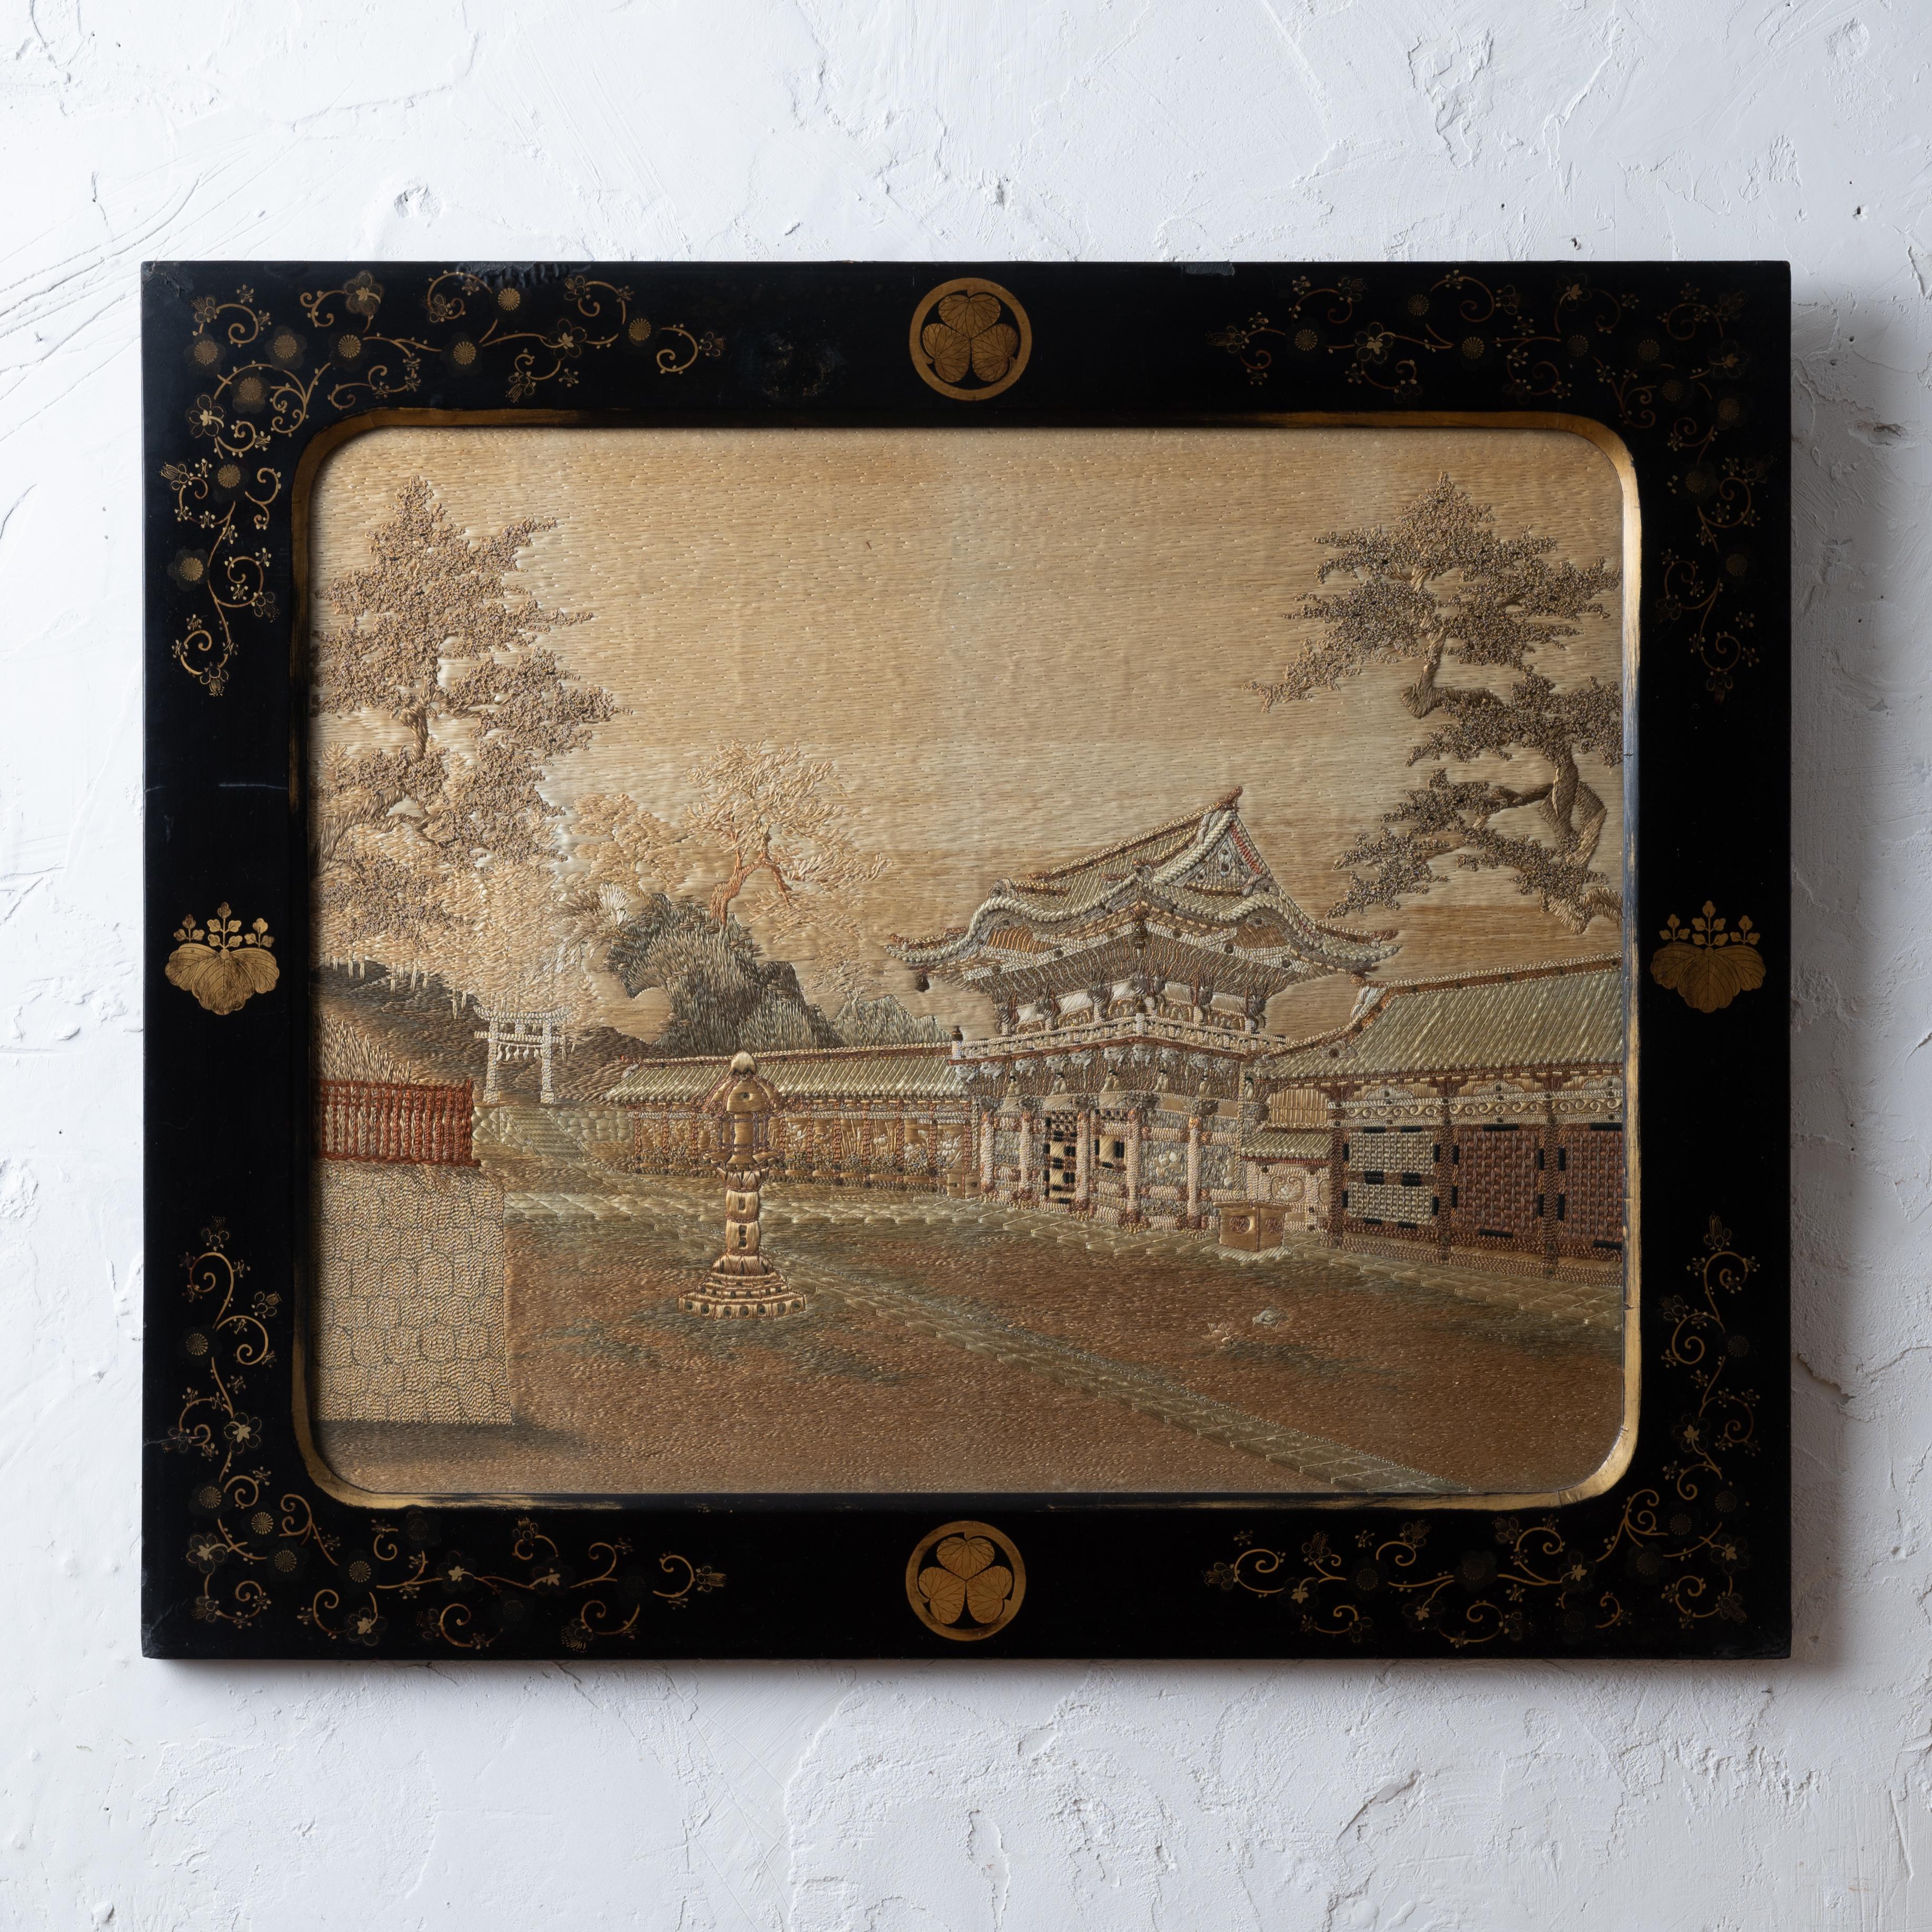 A Japanese export silk embroidery of a Shinto shrine in original parcel gilt ebonized lacquer frame, circa 1890.

29 ¼ by 24 ¾ inches

